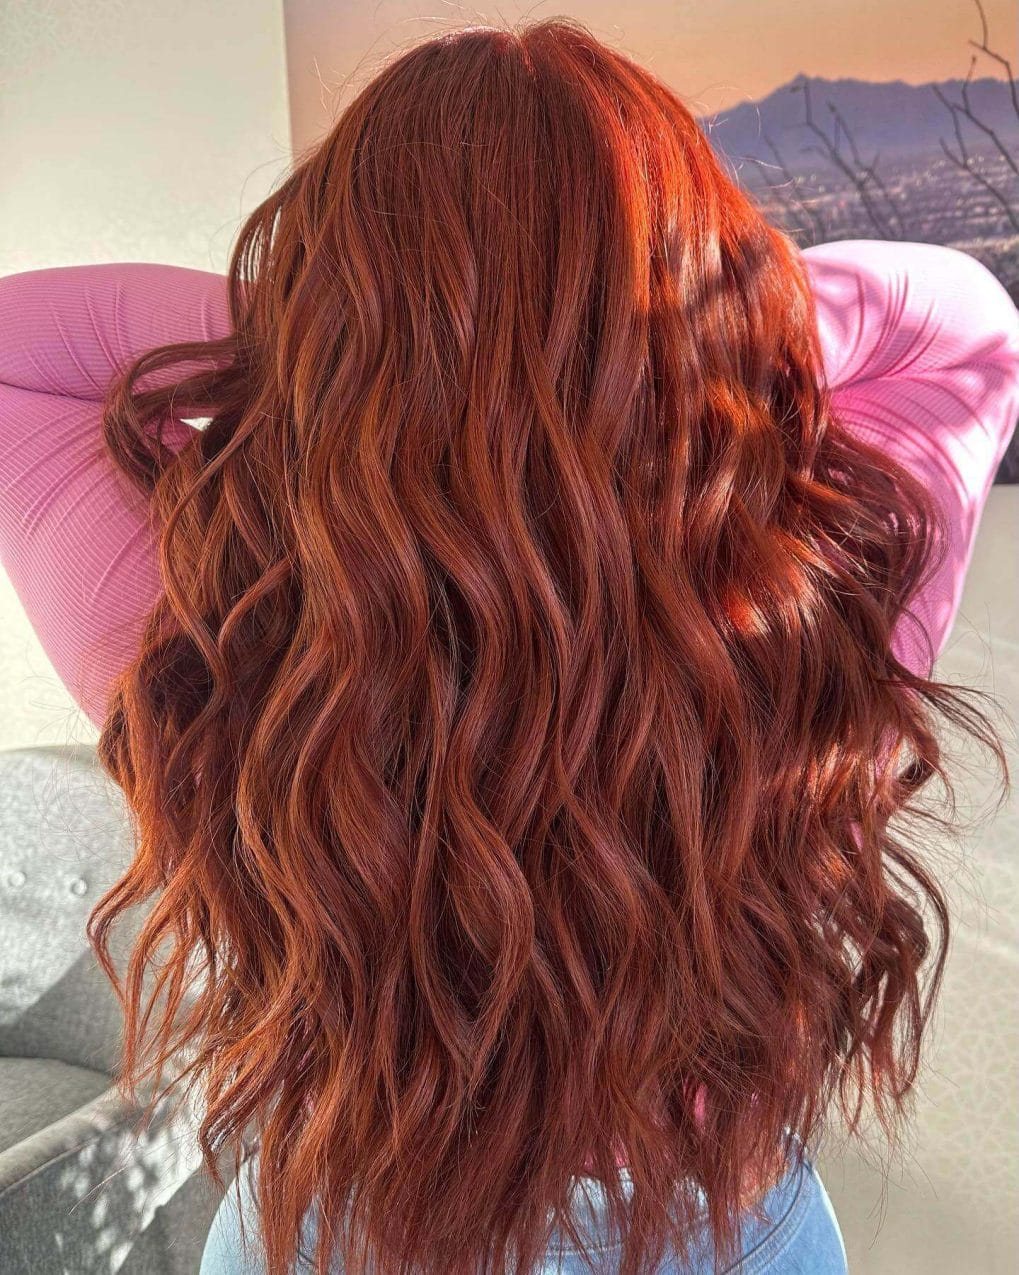 Glossy copper hair with voluminous curls and long, bouncing layers.